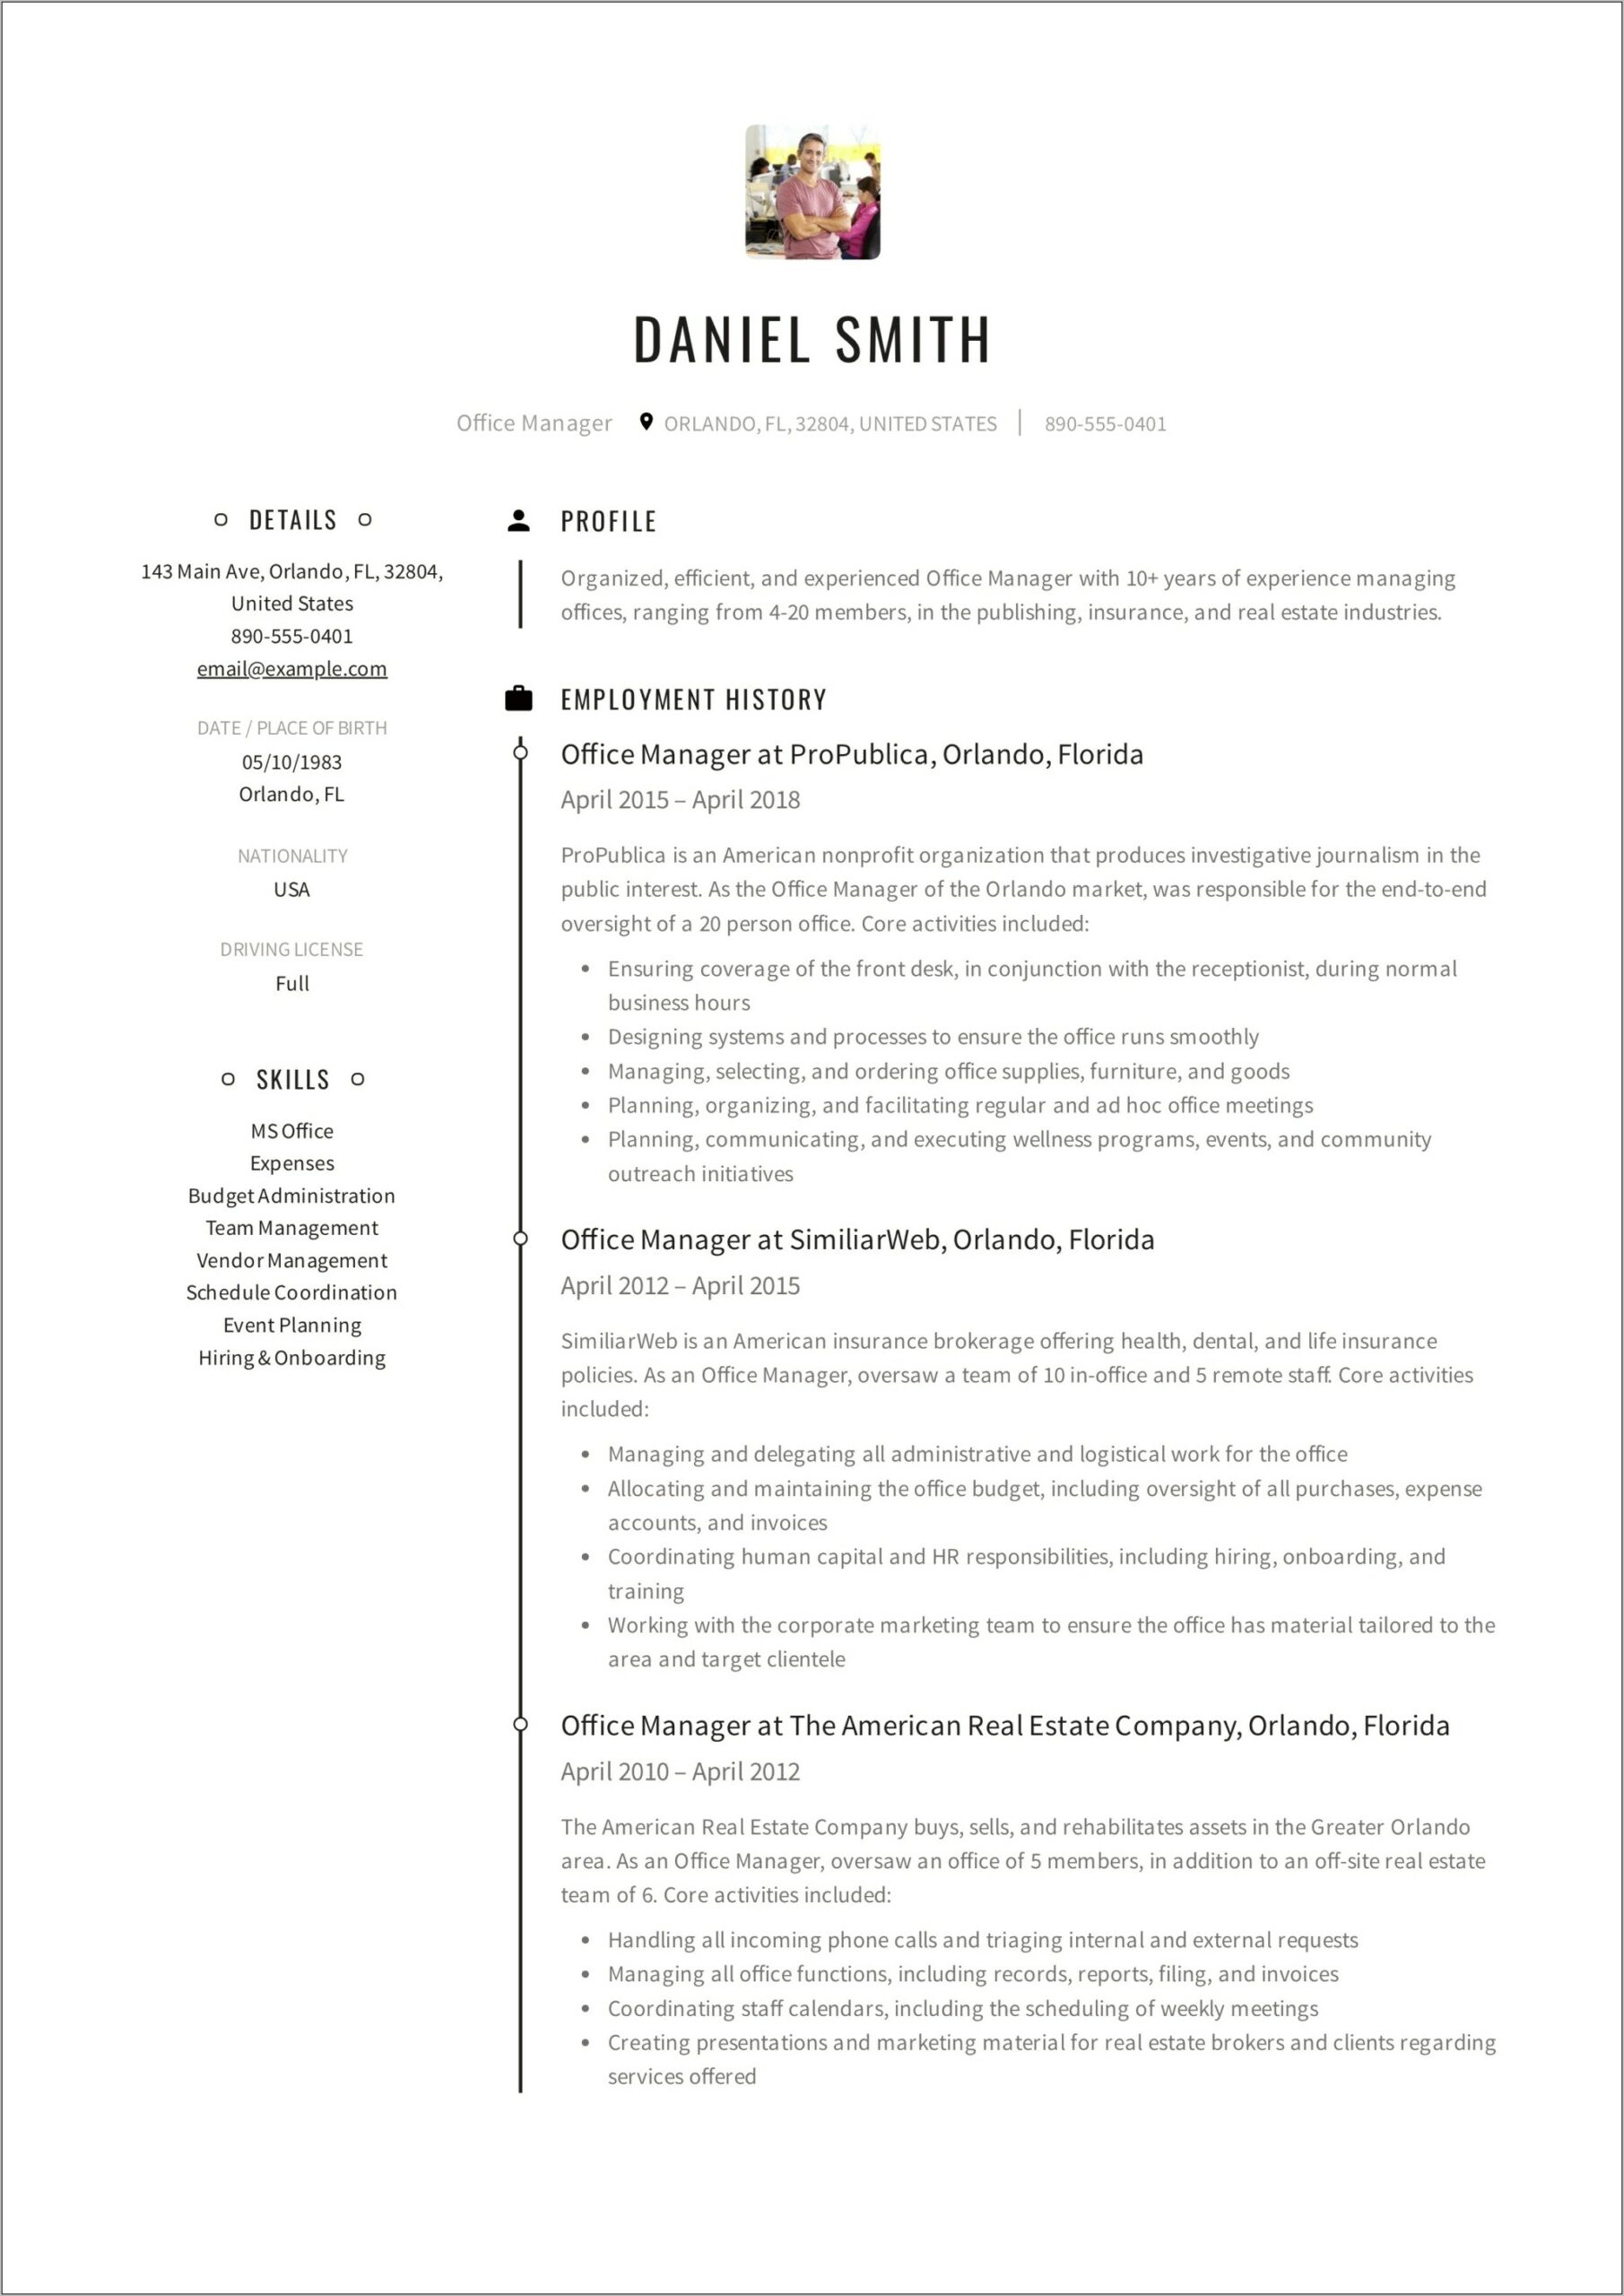 Office Manager Responsibilities Resume Sample